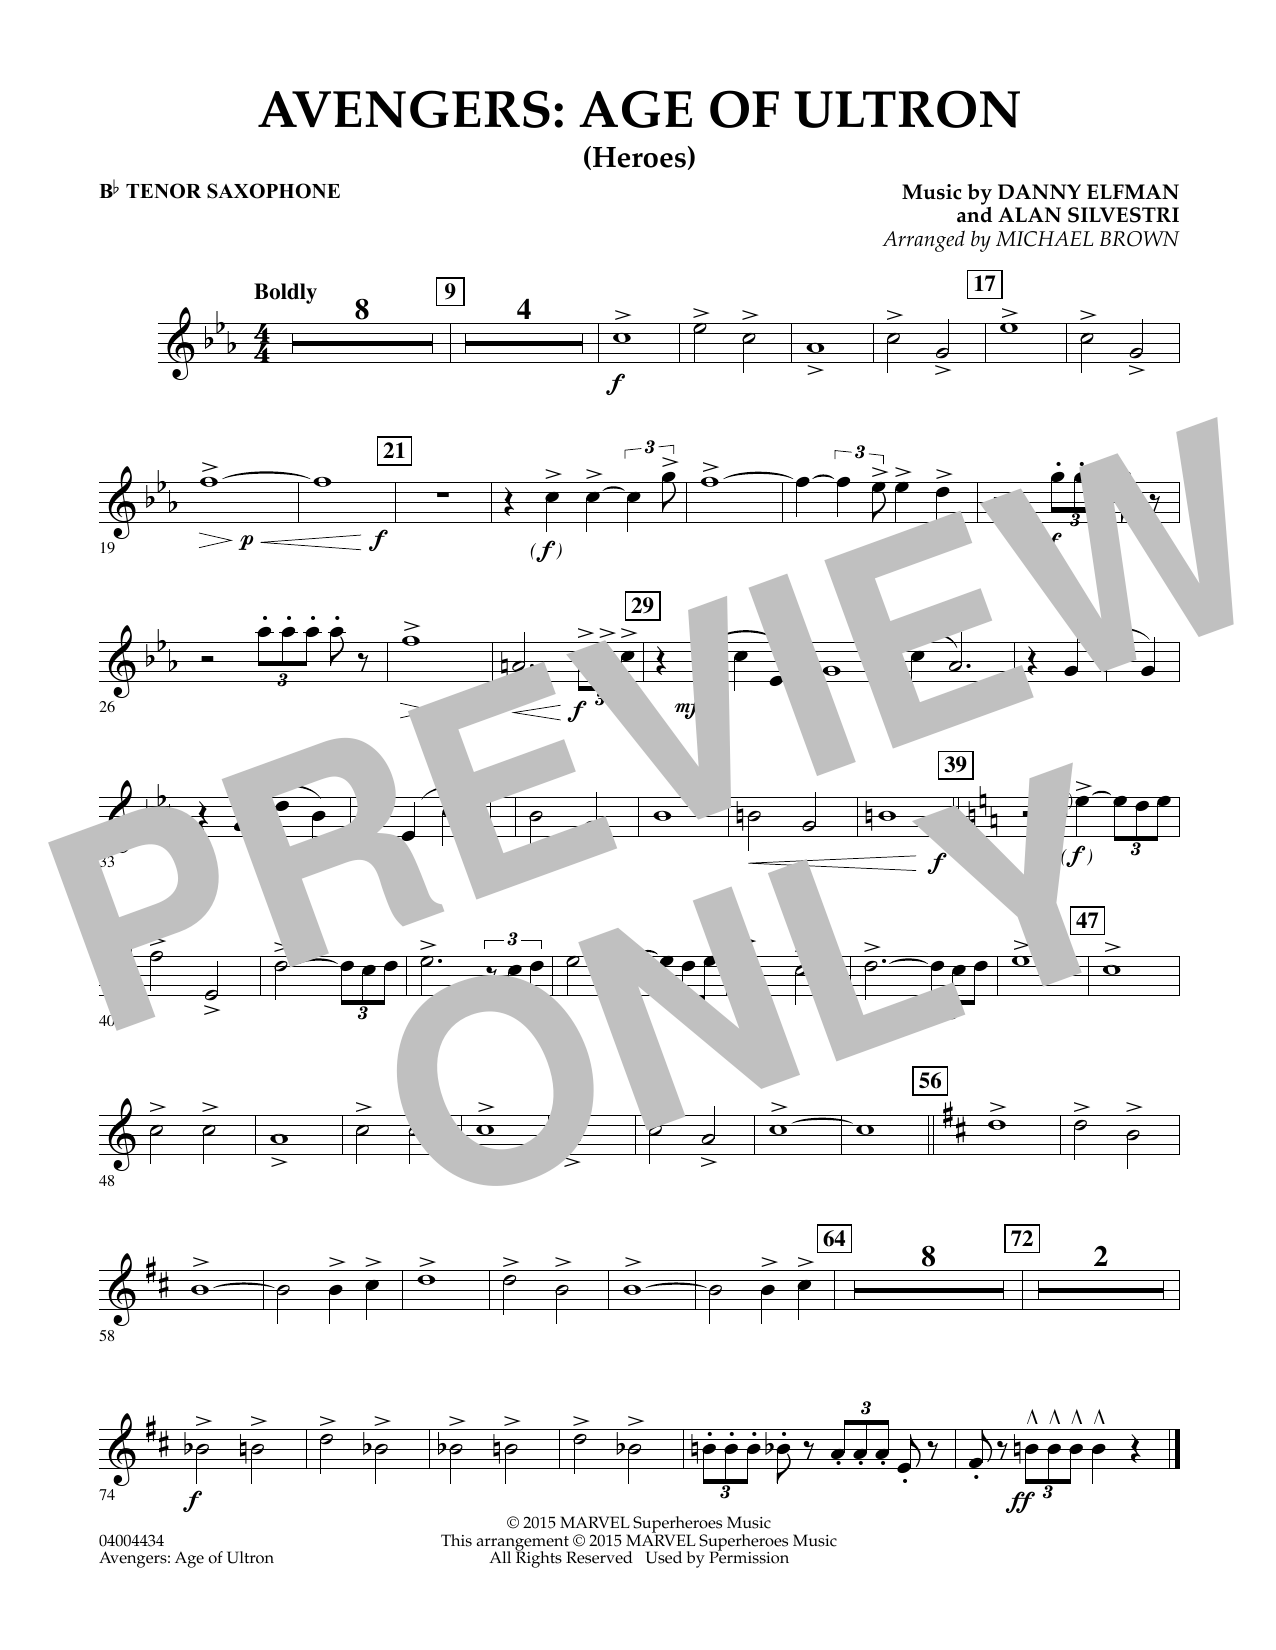 Michael Brown Avengers: The Age of Ultron (Main Theme) - Bb Tenor Saxophone sheet music notes and chords. Download Printable PDF.